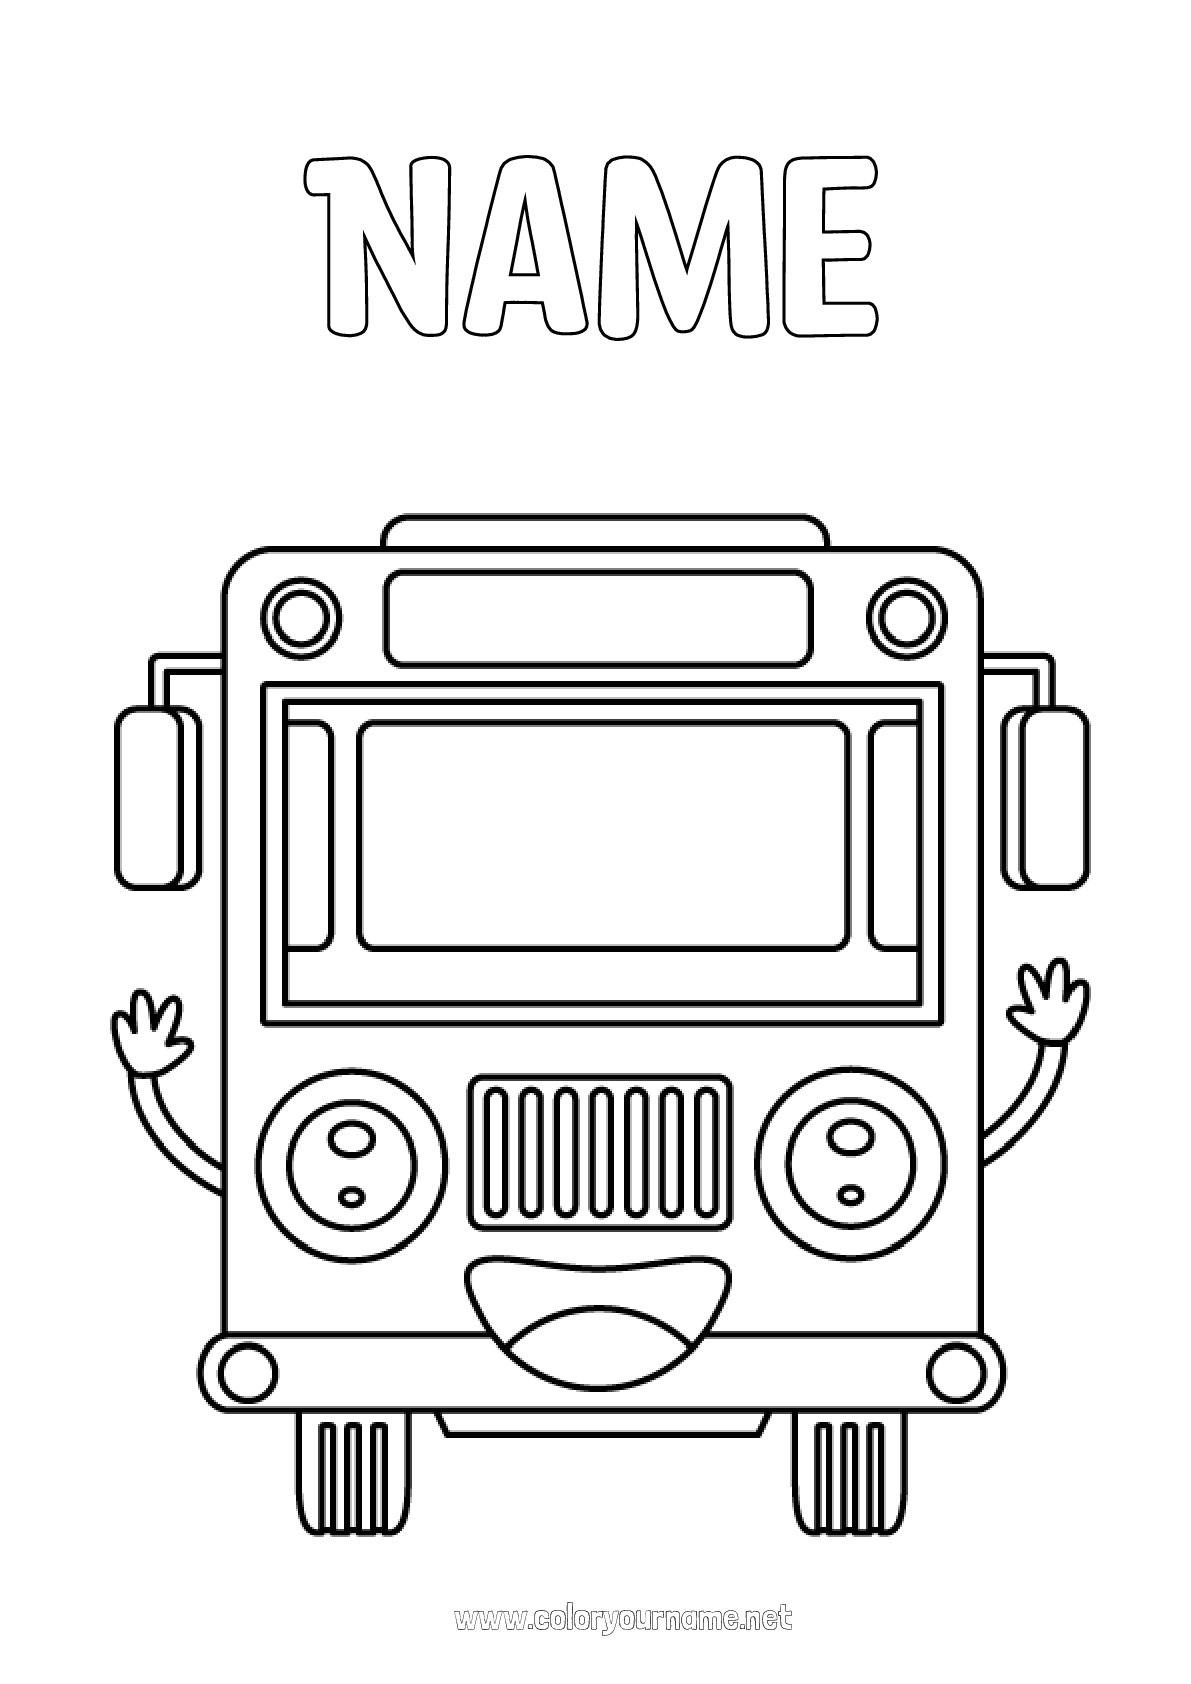 coach bus colouring page